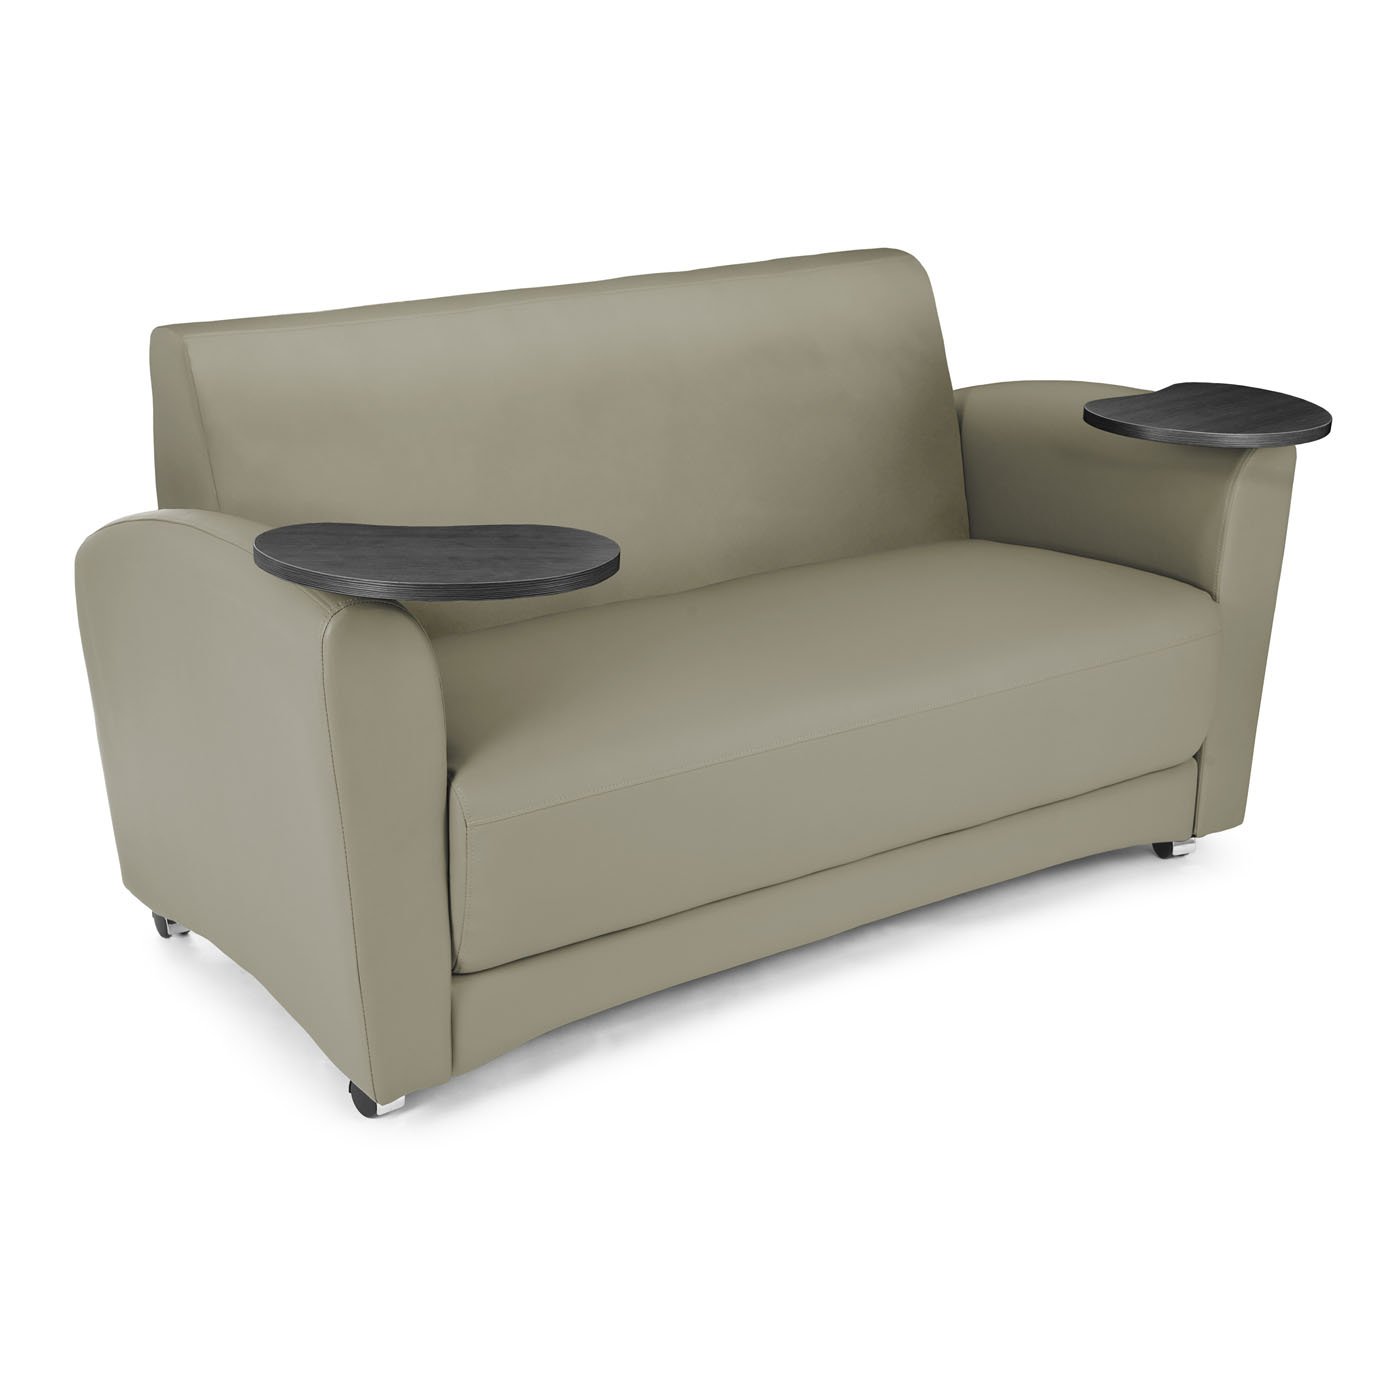 OFM 822 Double Tablet Sofa